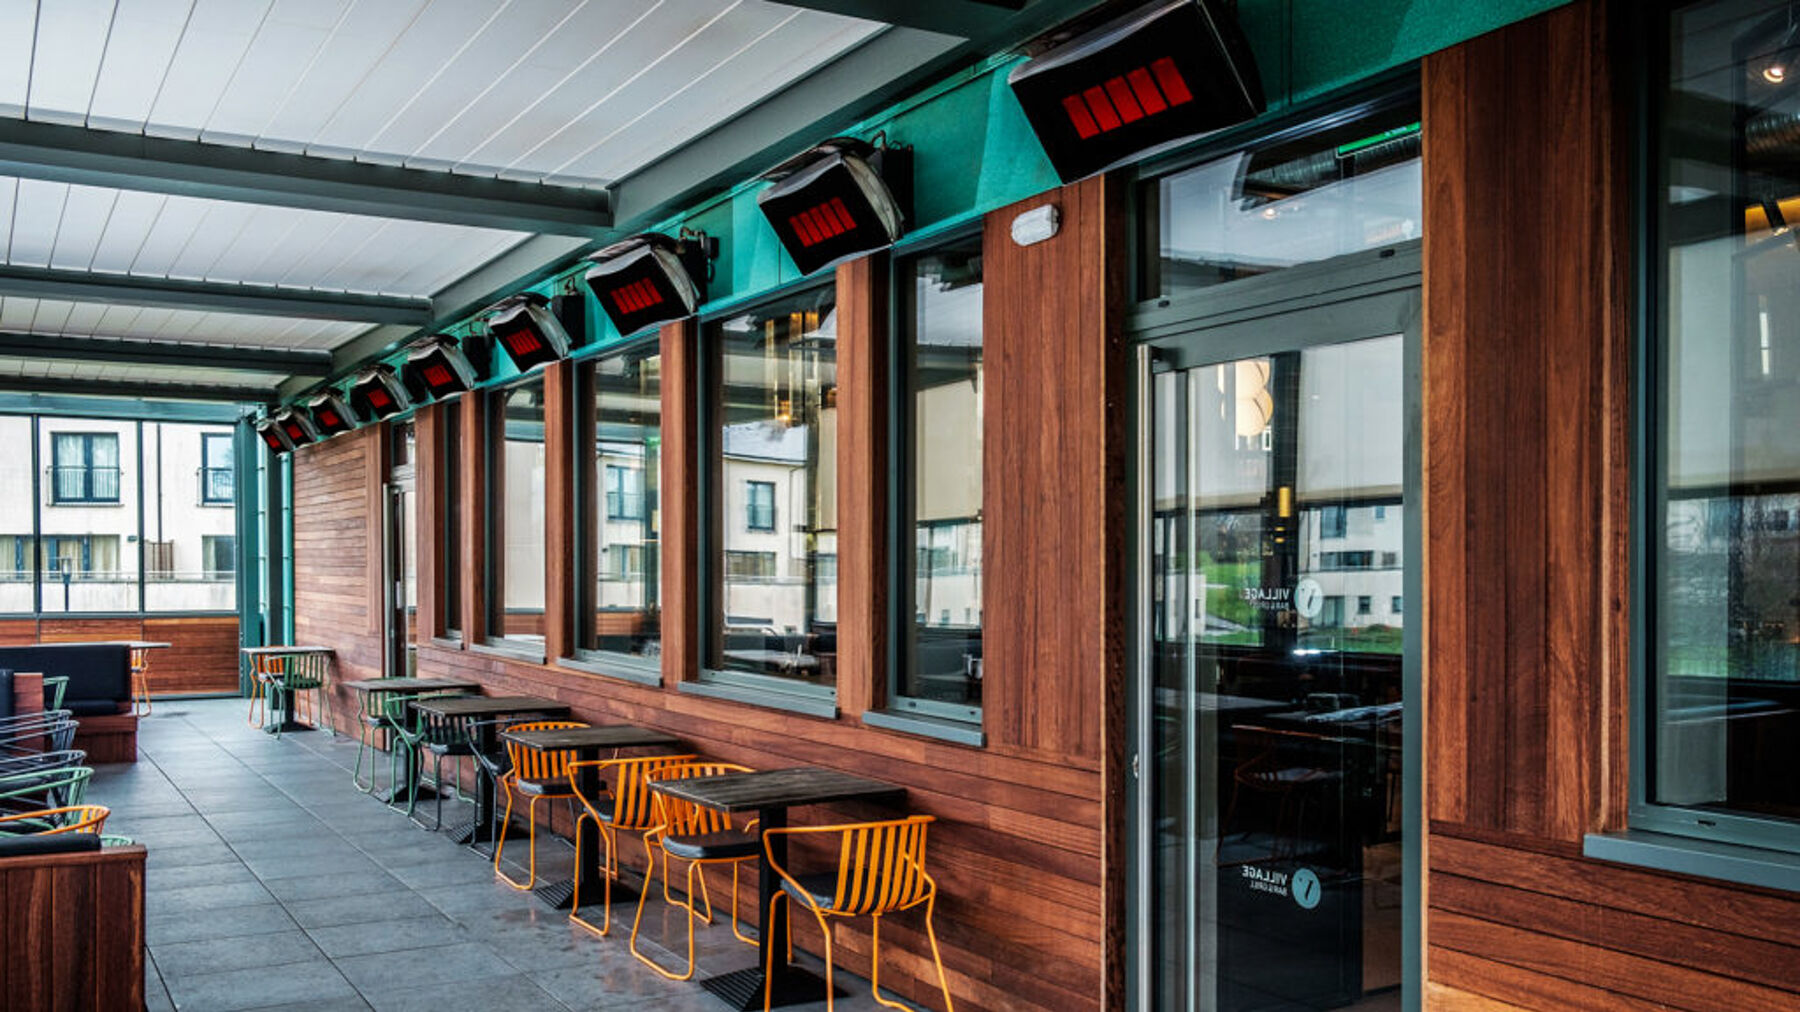 An outdoor restaurant patio space with multiple gas patio heaters mounted along the upper walls.